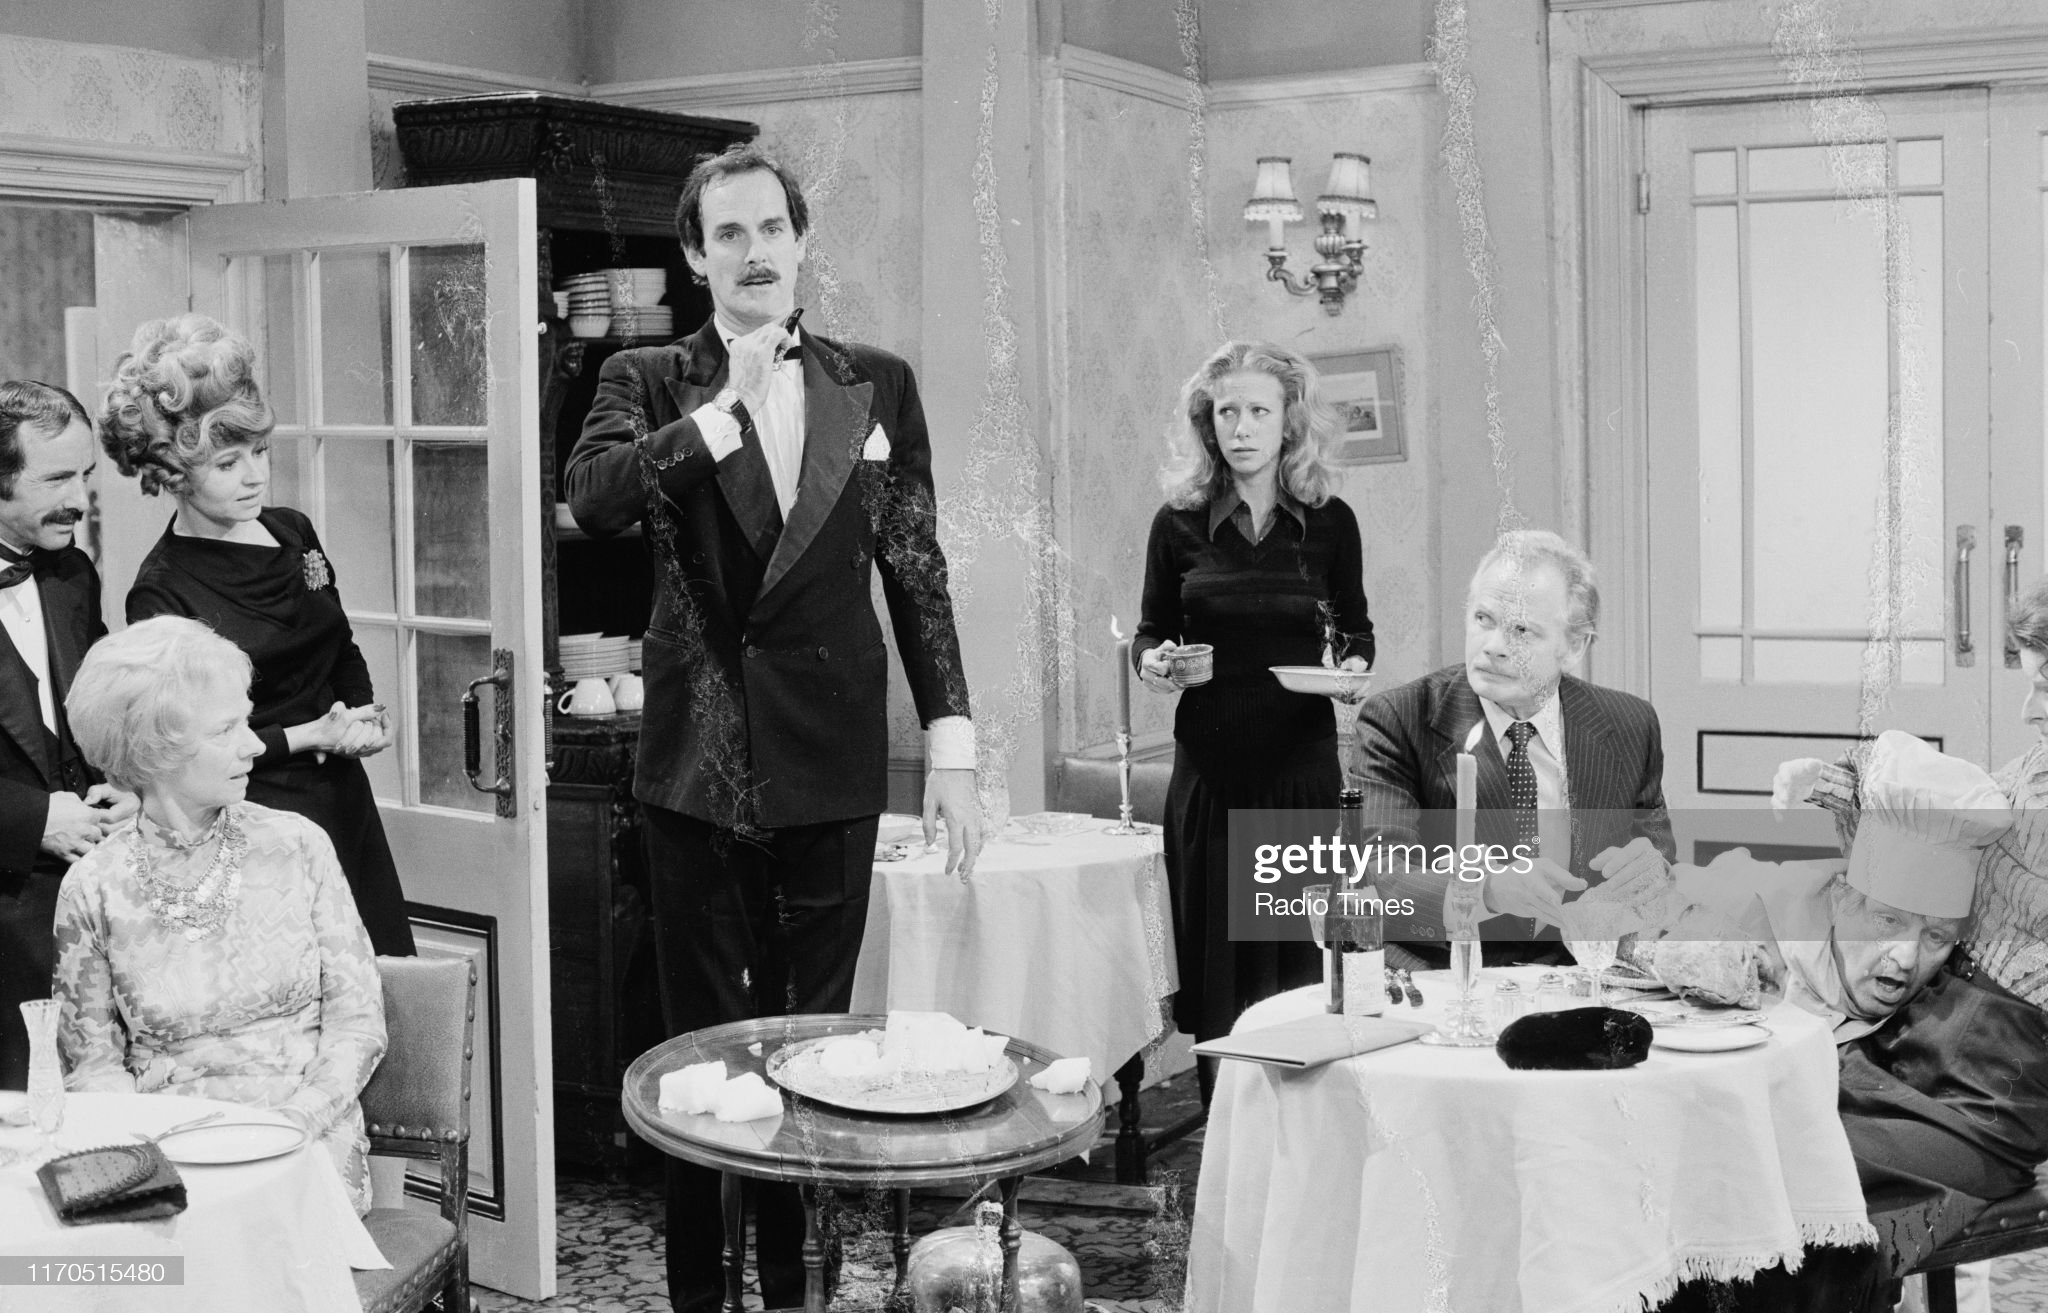 Actors (L-R) Andrew Sachs, Betty Huntley-Wright, Prunella Scales, John Cleese, Connie Booth, Allan Cuthbertson and Steve Plytas in a scene from episode 'Gourmet Night' of the BBC television sitcom 'Fawlty Towers', September 6th 1975. (Photo by Don Smith/Radio Times via Getty Images)